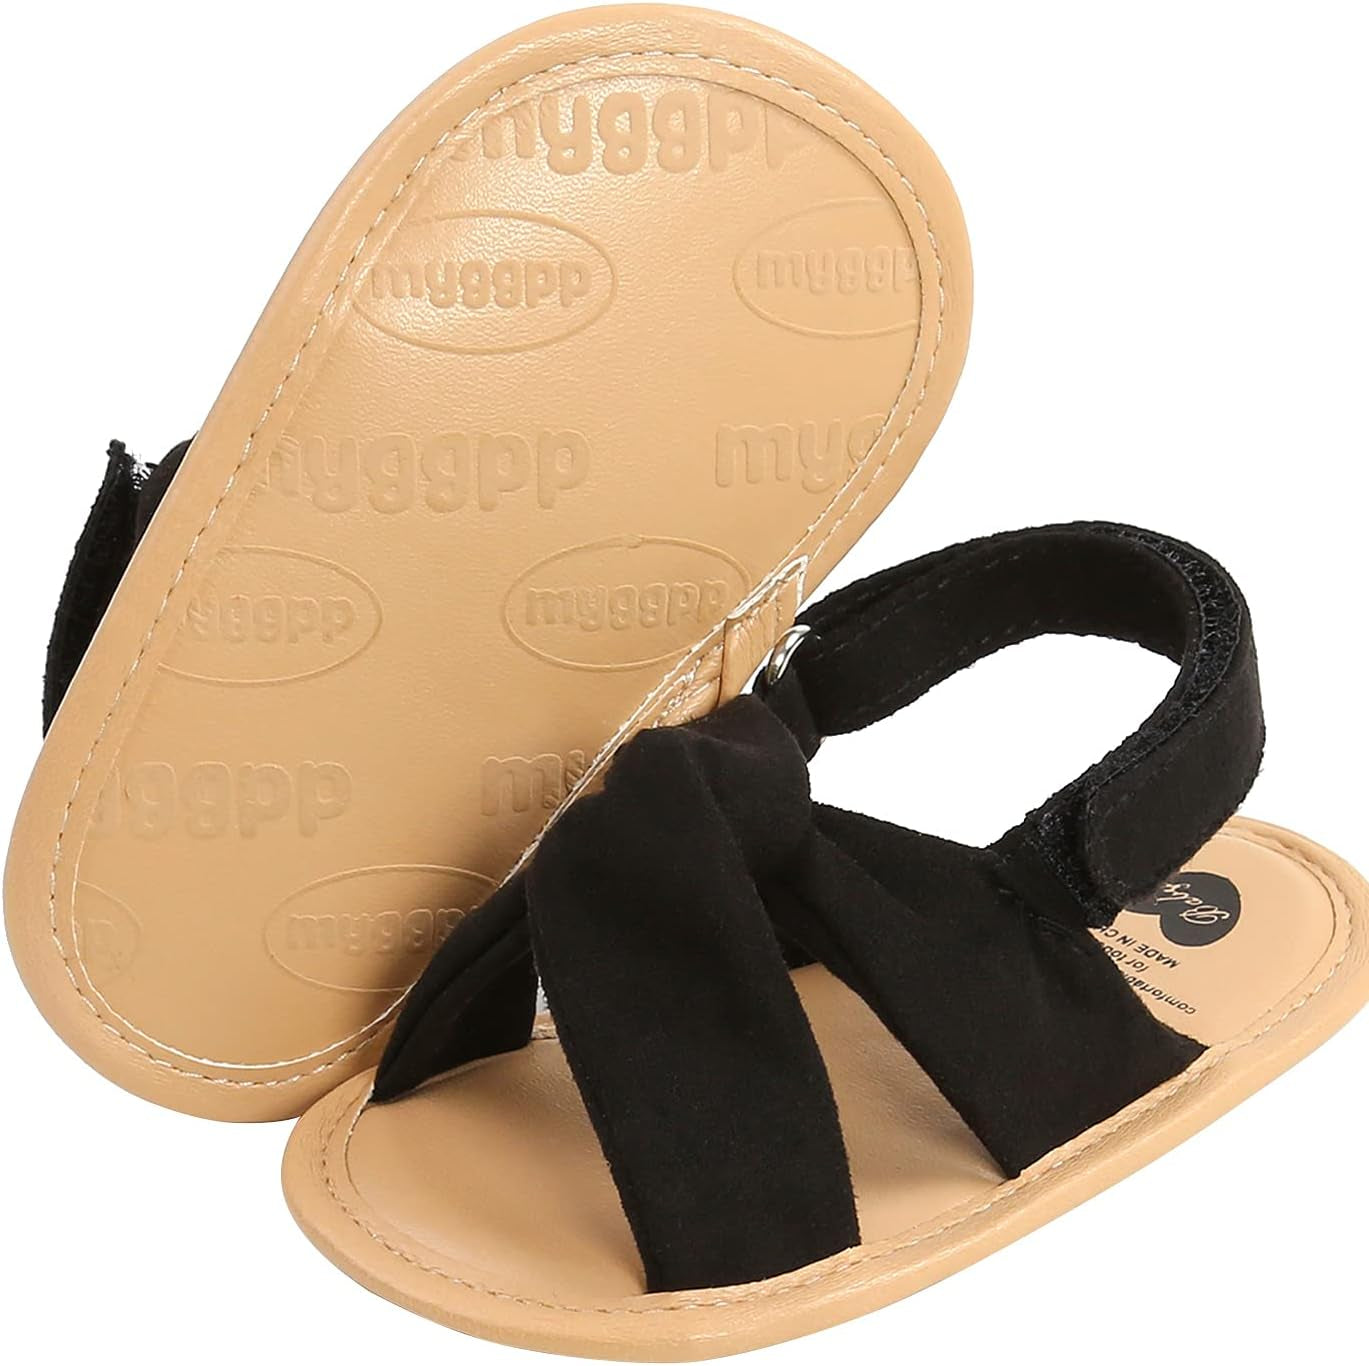 Prewalker Infant Girls' Breathable Summer Sandals in a Basic Style with a Solid Color and Soft Sole